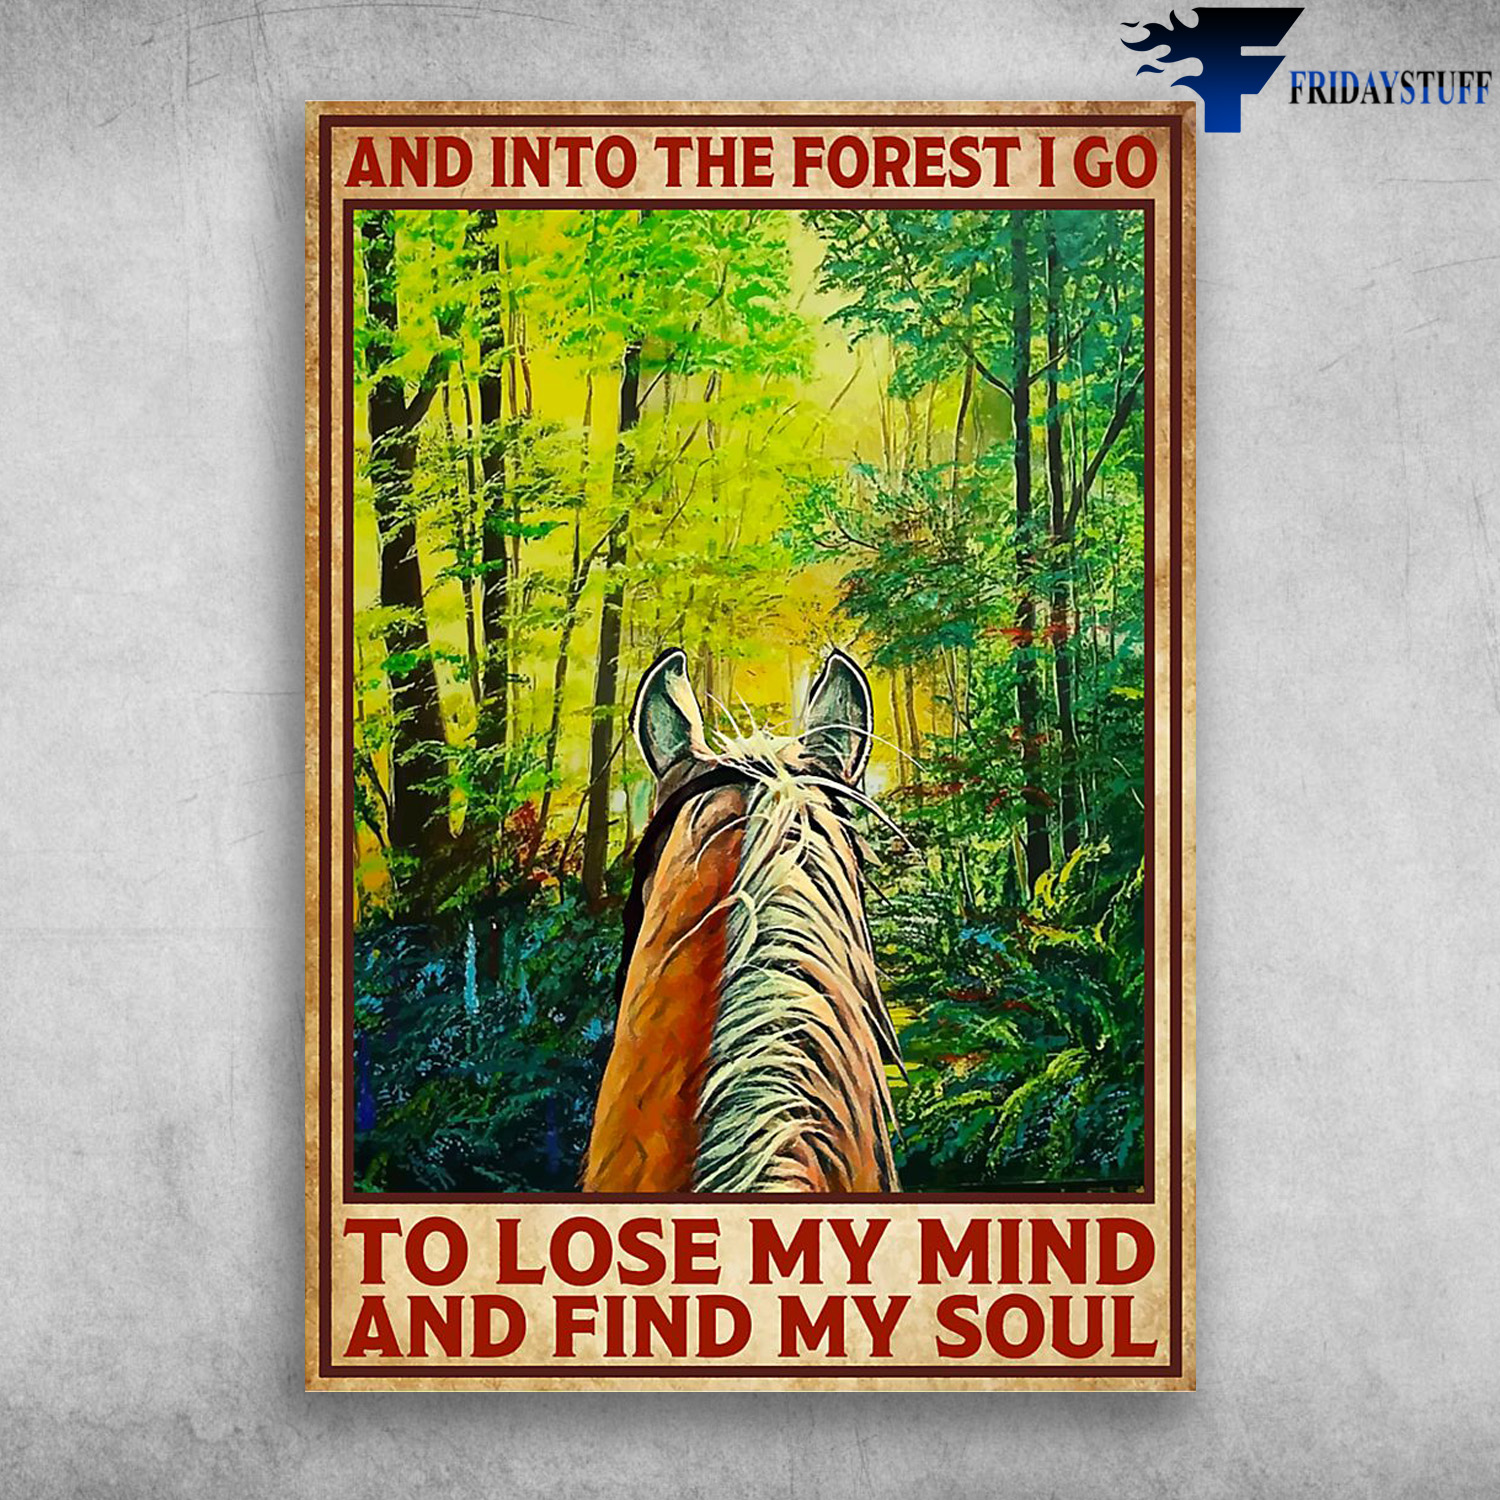 Riding Horse In Forrest - And Into The Forest, I Go To Lose My Mind, And Find My Soul